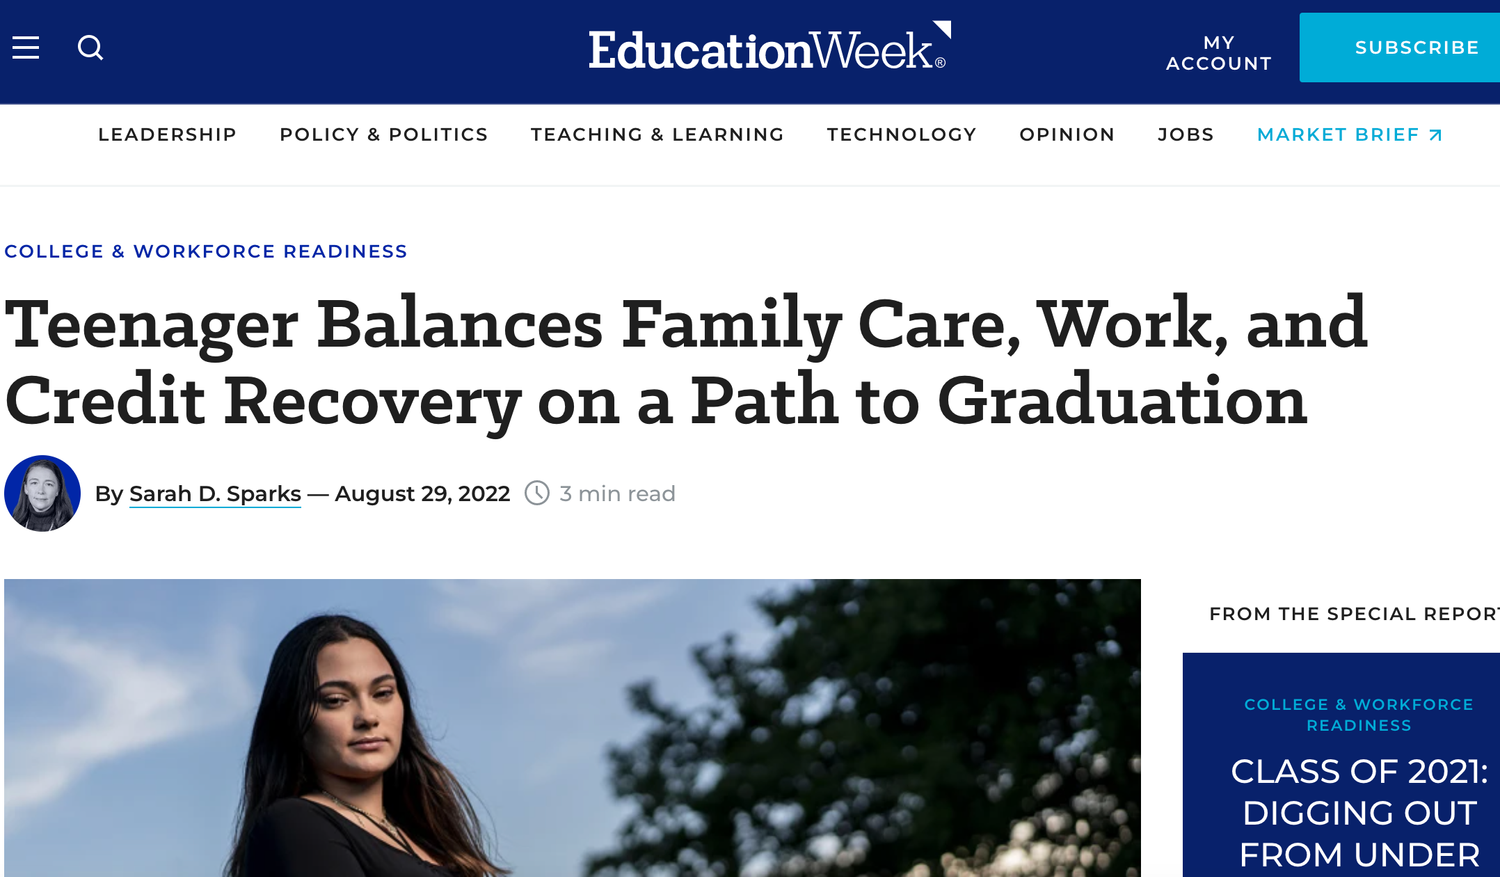 Teenager Balances Family Care, Work, and Credit Recovery on a Path to Graduation headline screenshot.